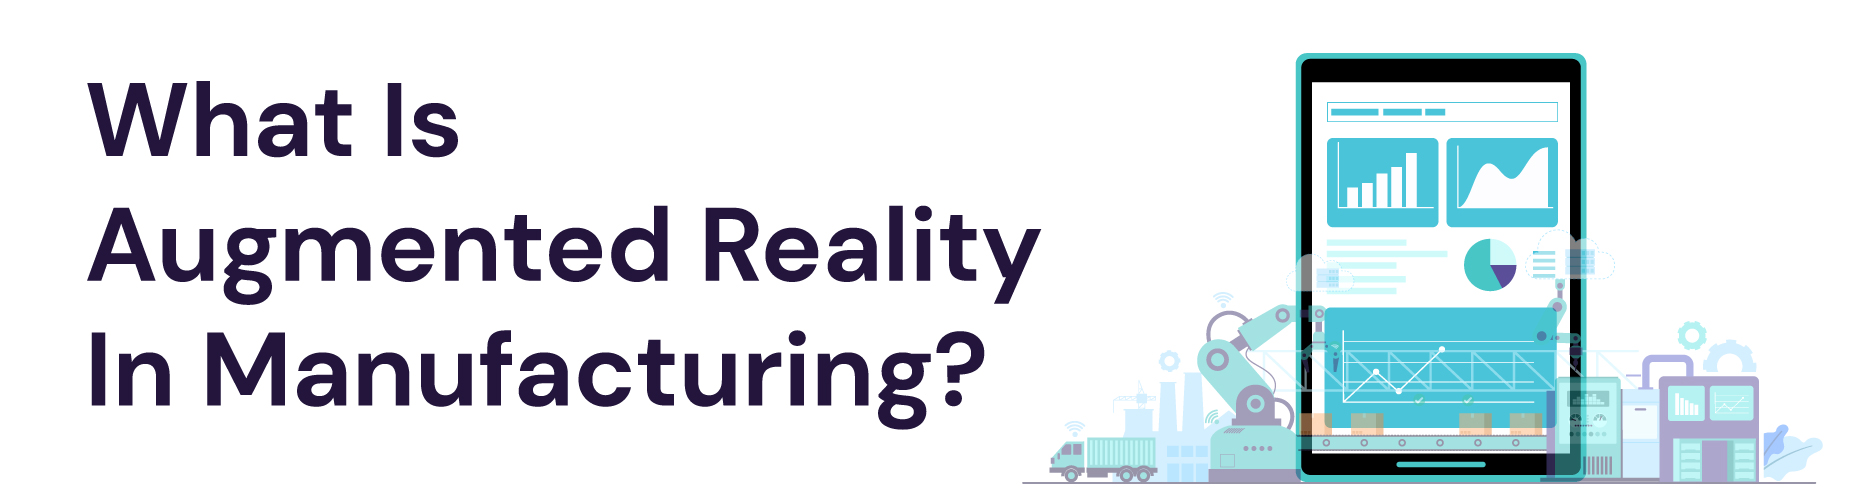 what is Augmented Reality In Manufacturing 